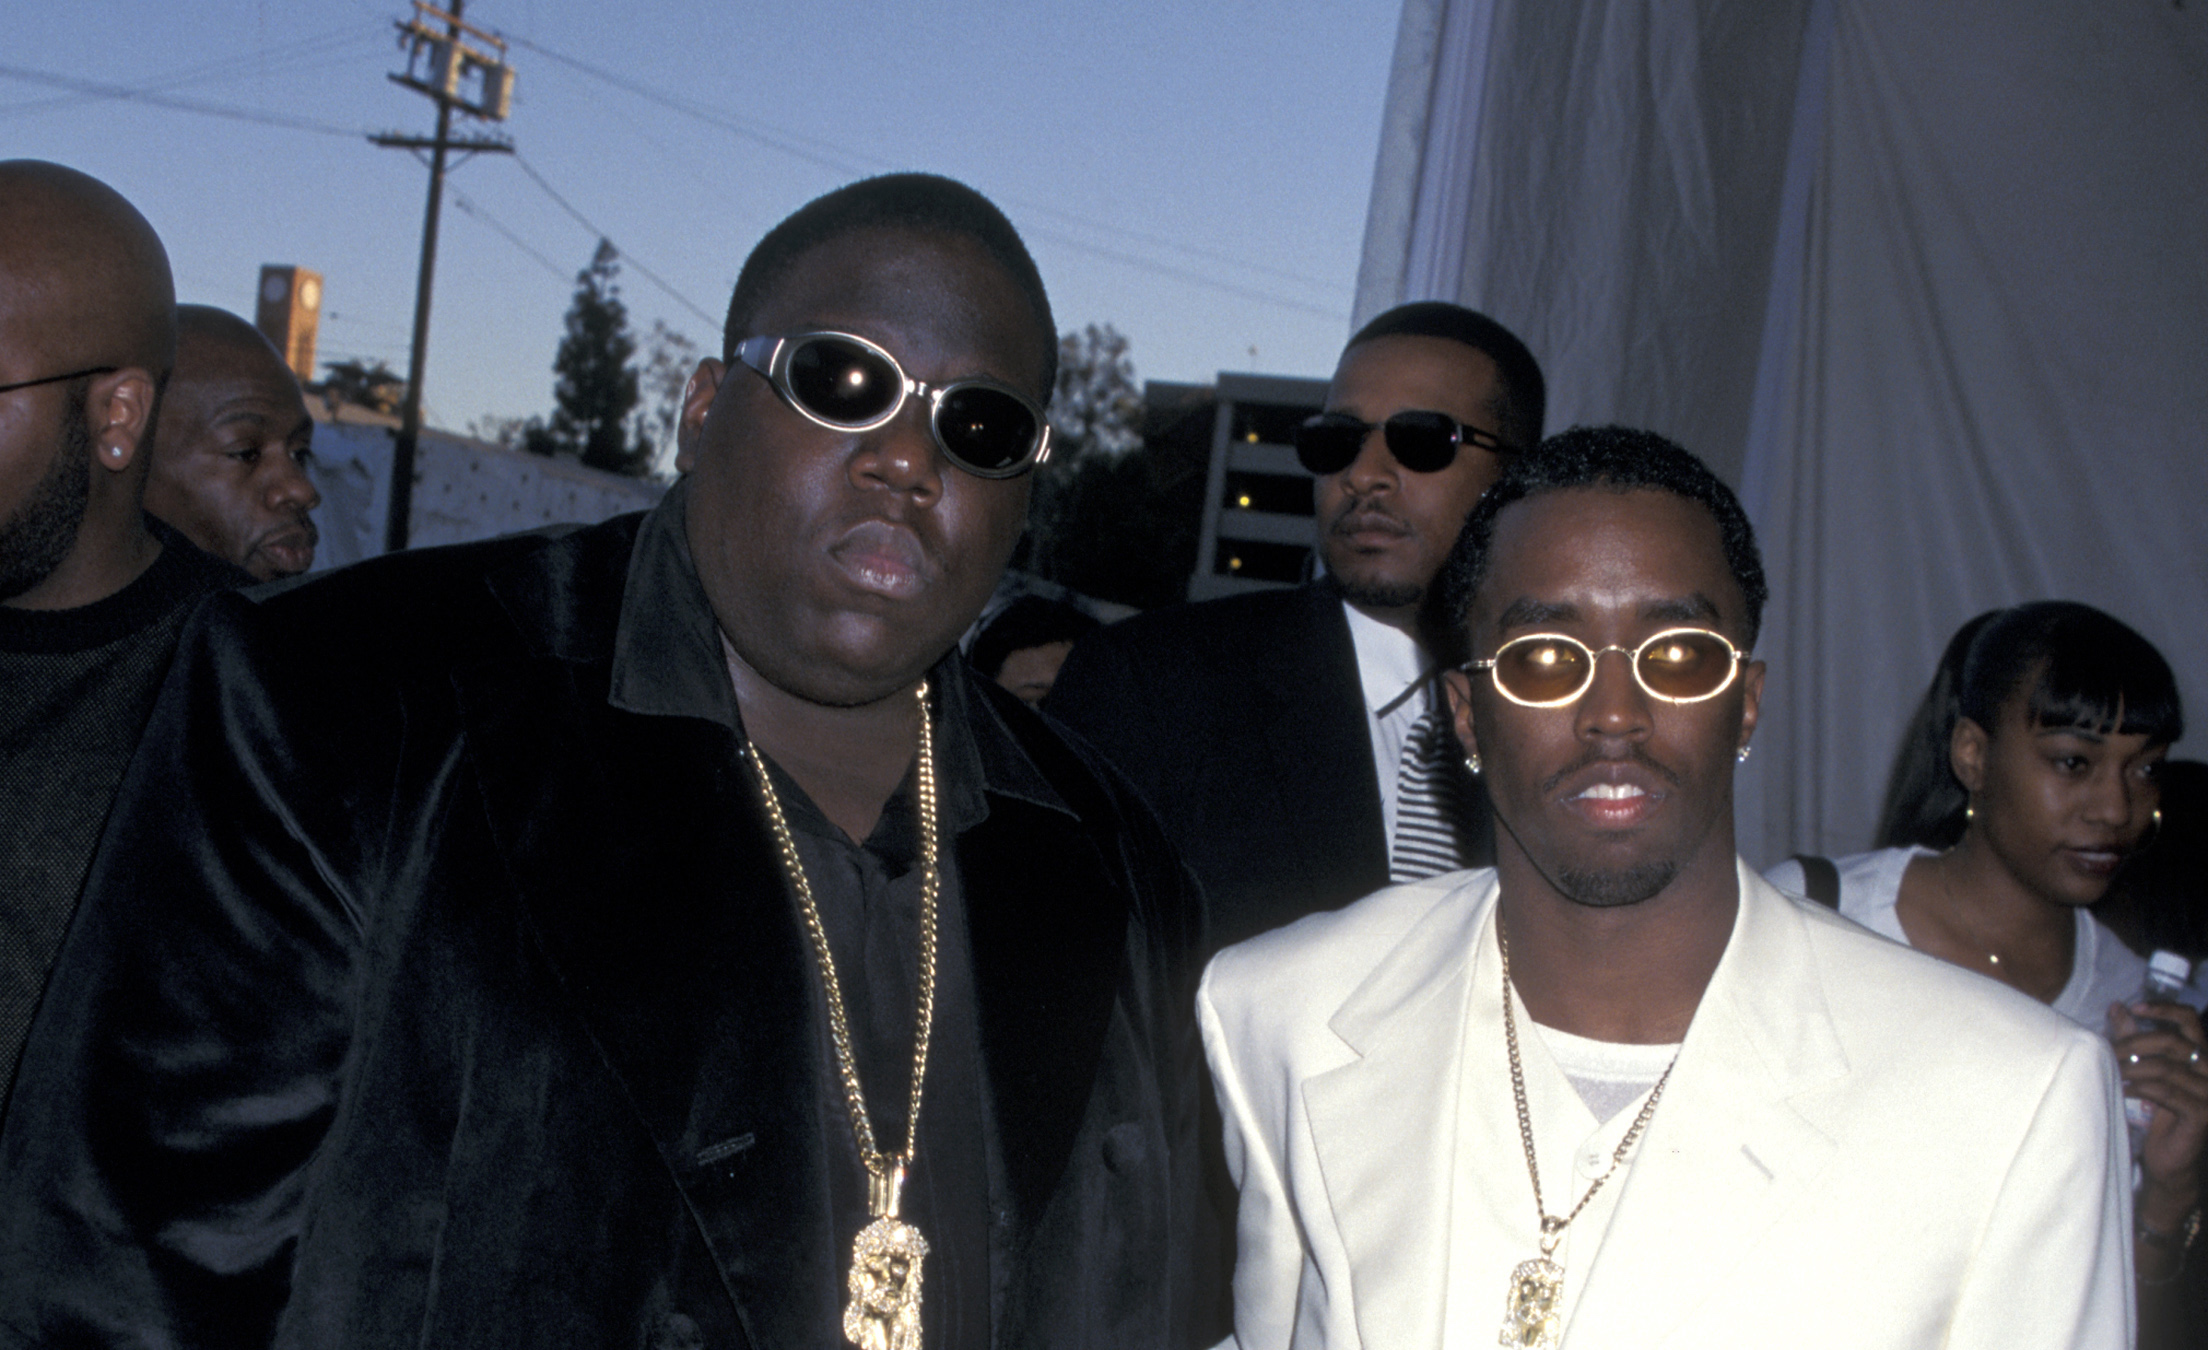 Christopher "The Notorious B.I.G." Wallace and Sean "P. Diddy" Combs